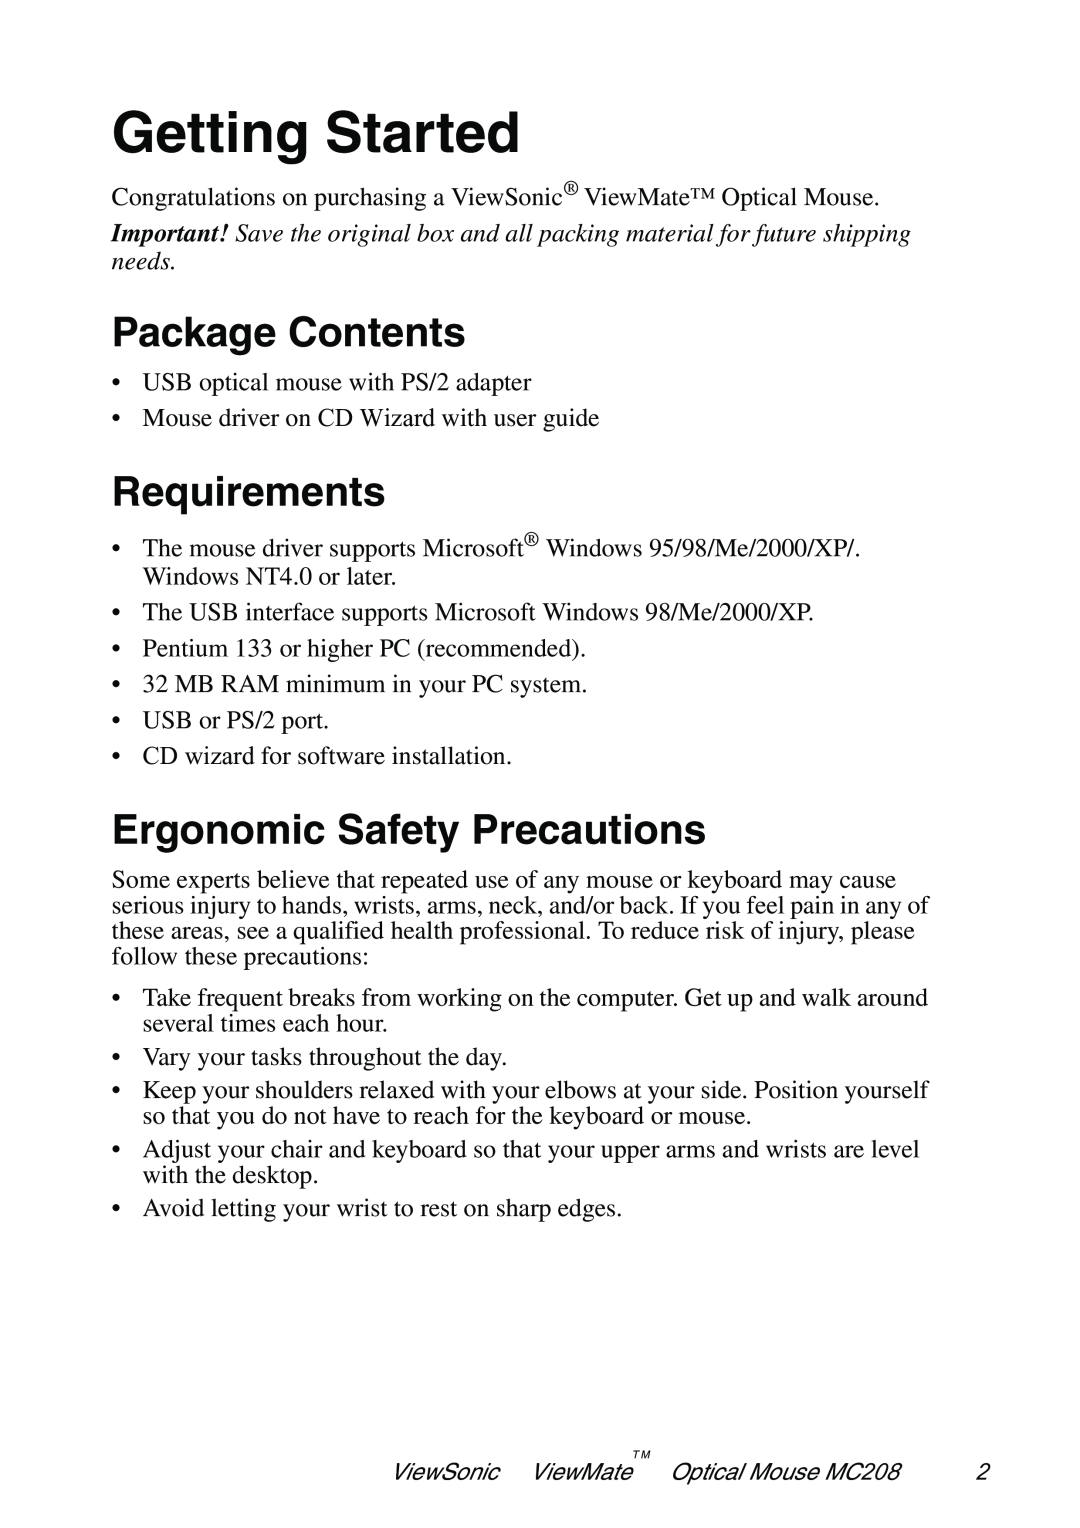 ViewSonic VS102127 manual Getting Started, Package Contents, Requirements, Ergonomic Safety Precautions 